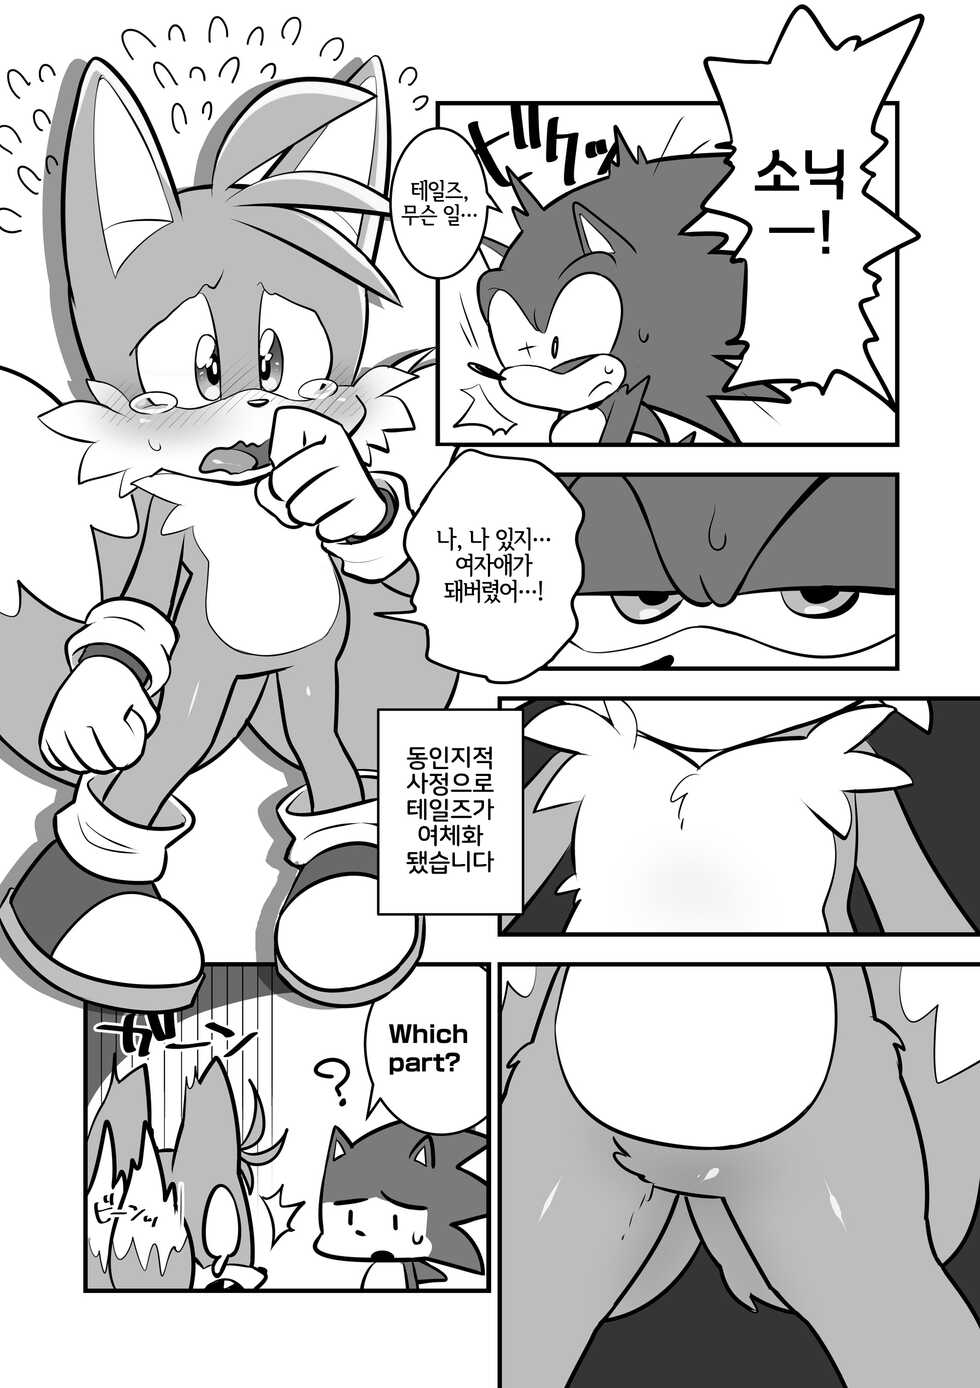 [hentaib] Tails and Sonic's special Fuss (Sonic the Hedgehog) [Korean] [LWND] - Page 2